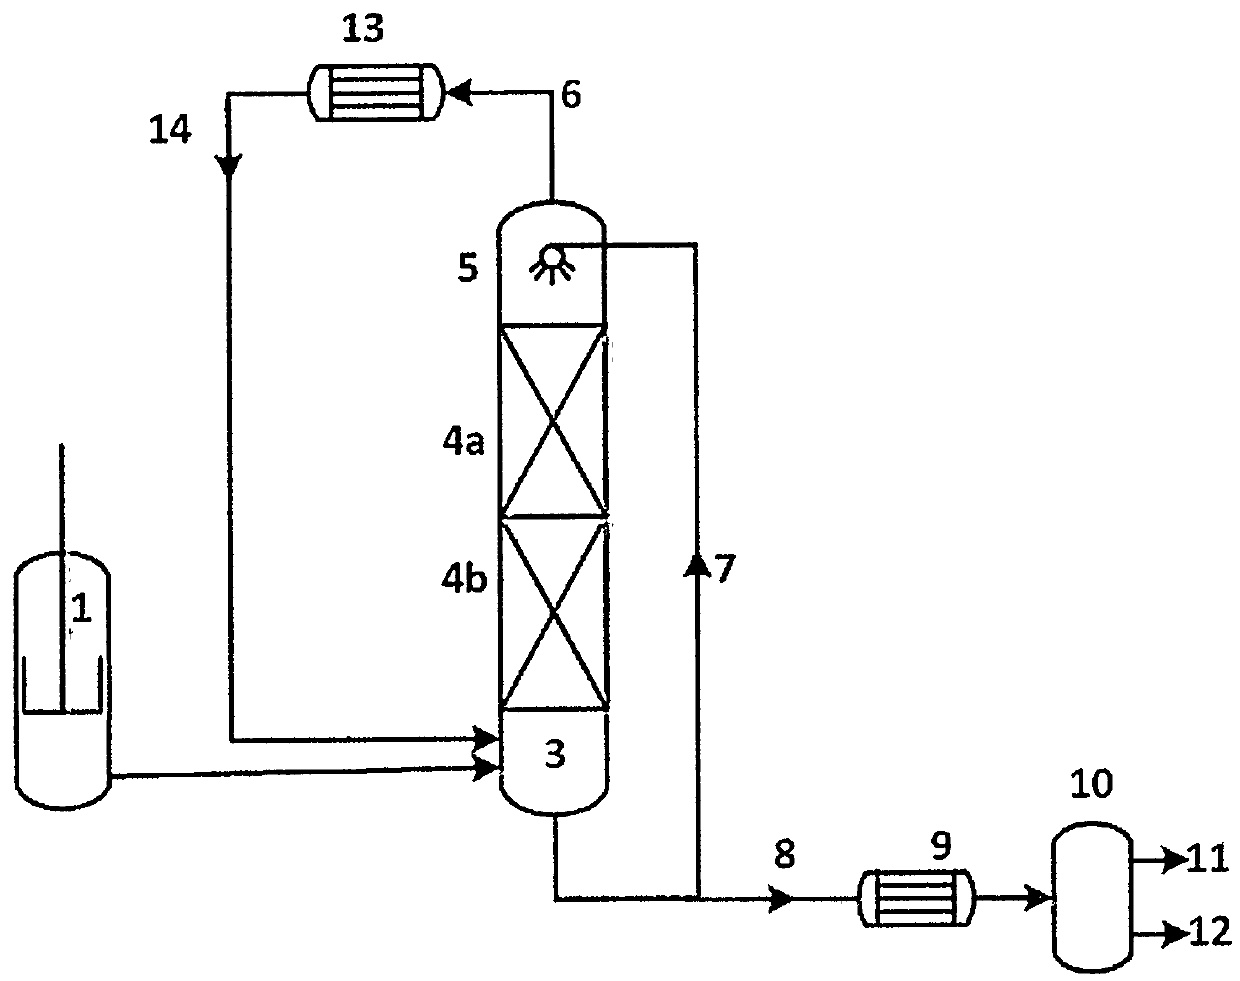 Method for synthesizing 2-methallyl alcohol through continuous hydrolysis reaction